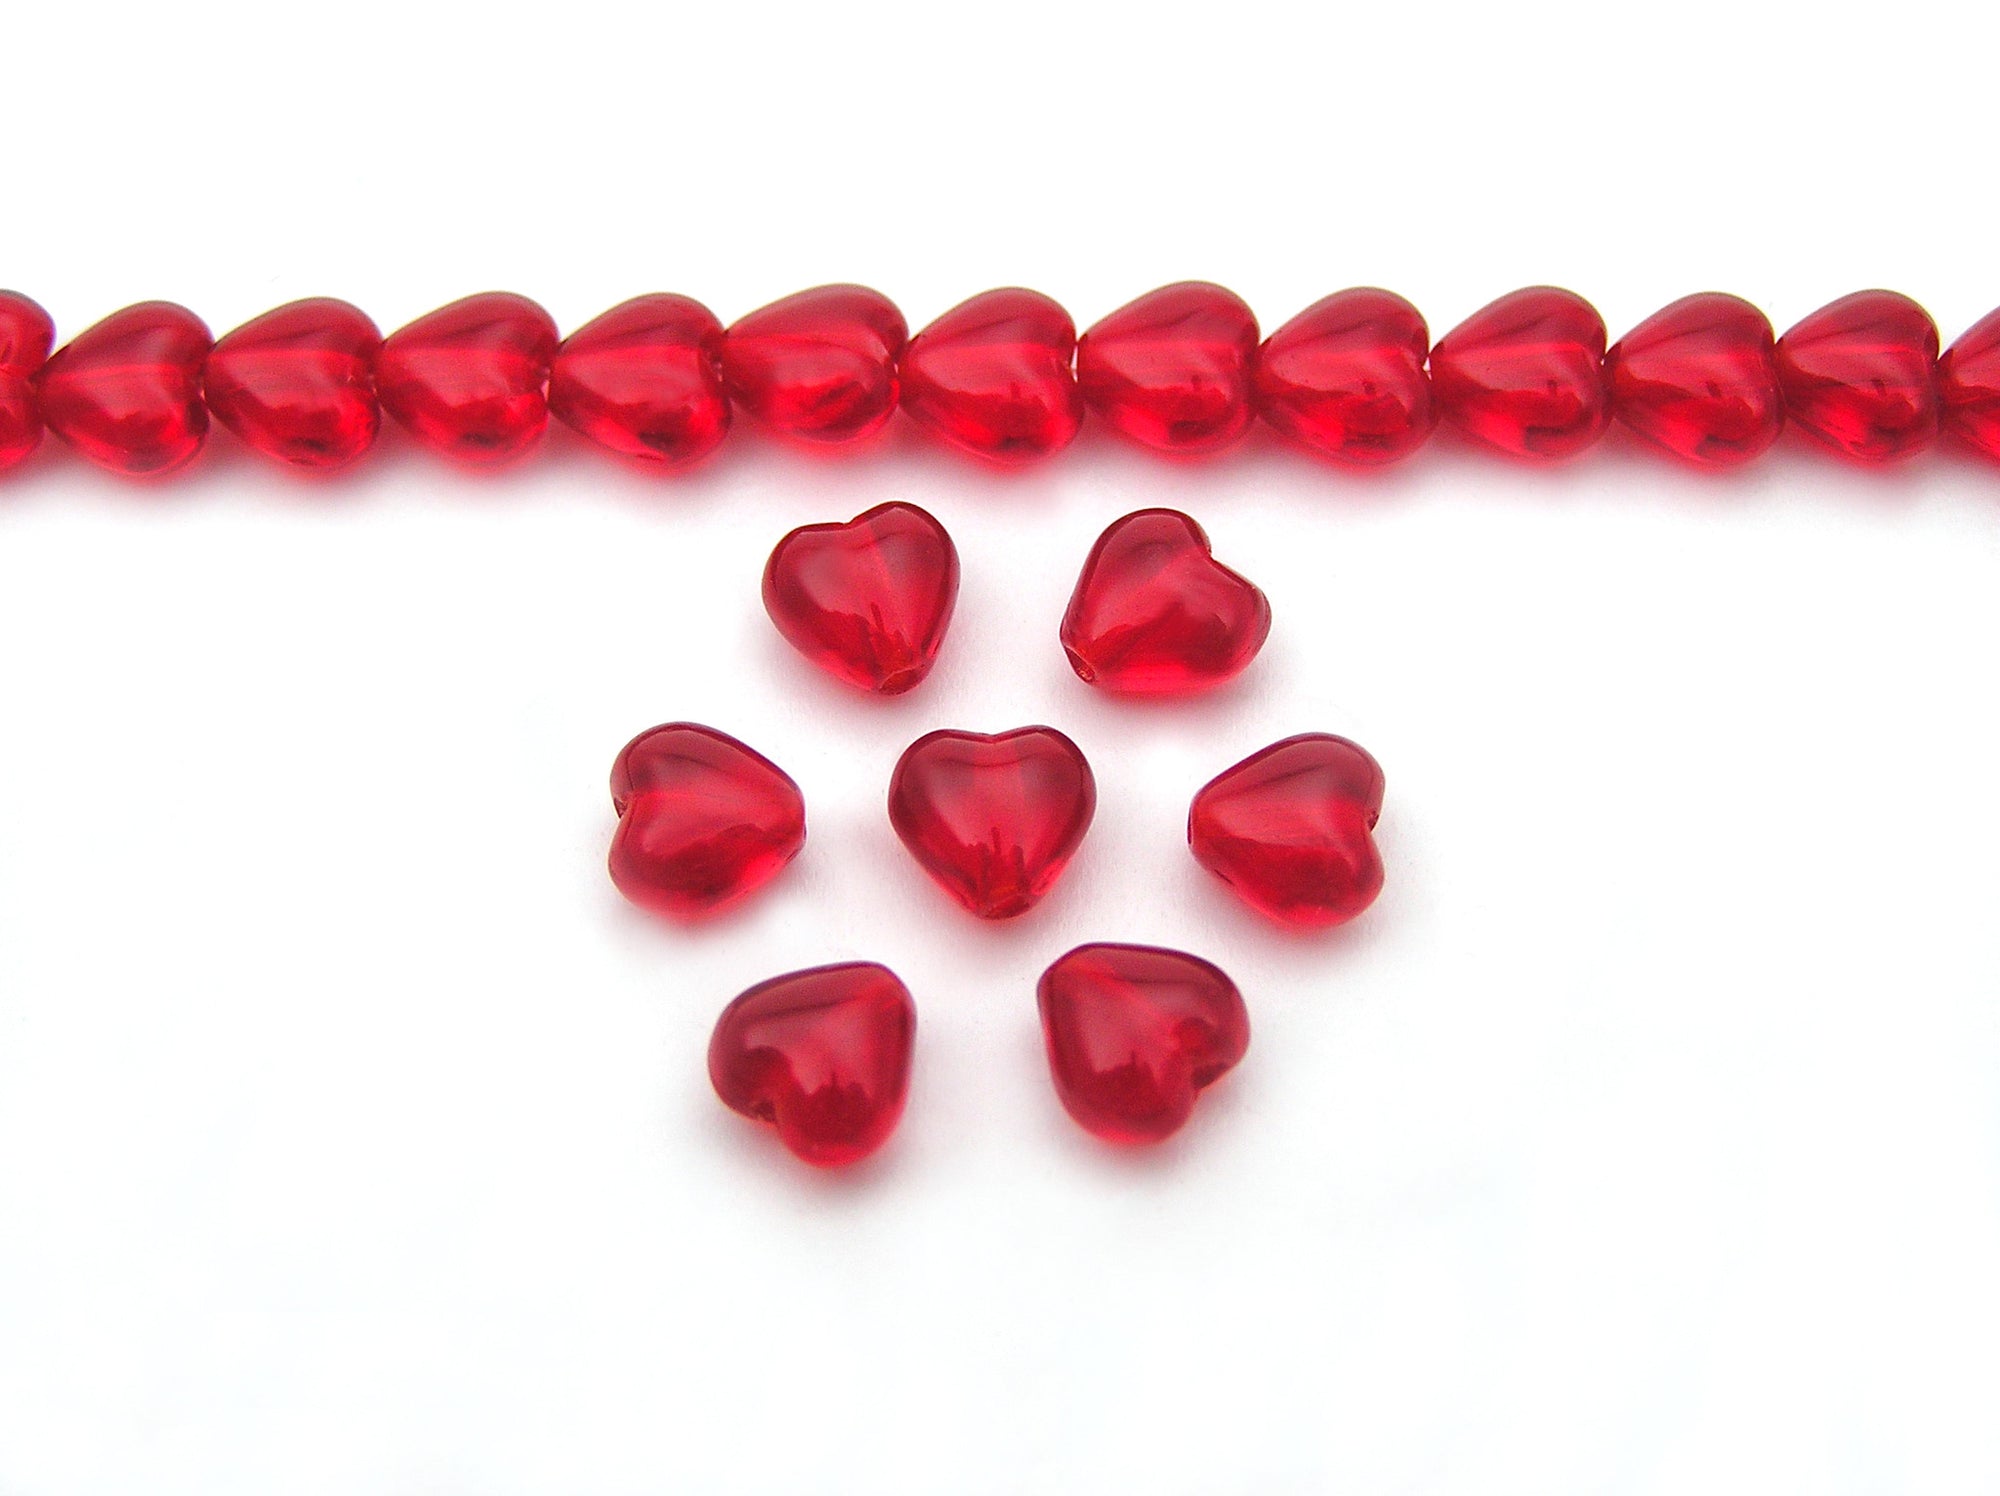 Czech glass Heart shaped druk beads 6x6mm Light Siam color, light red, Loose Pressed Beads, 50 pcs